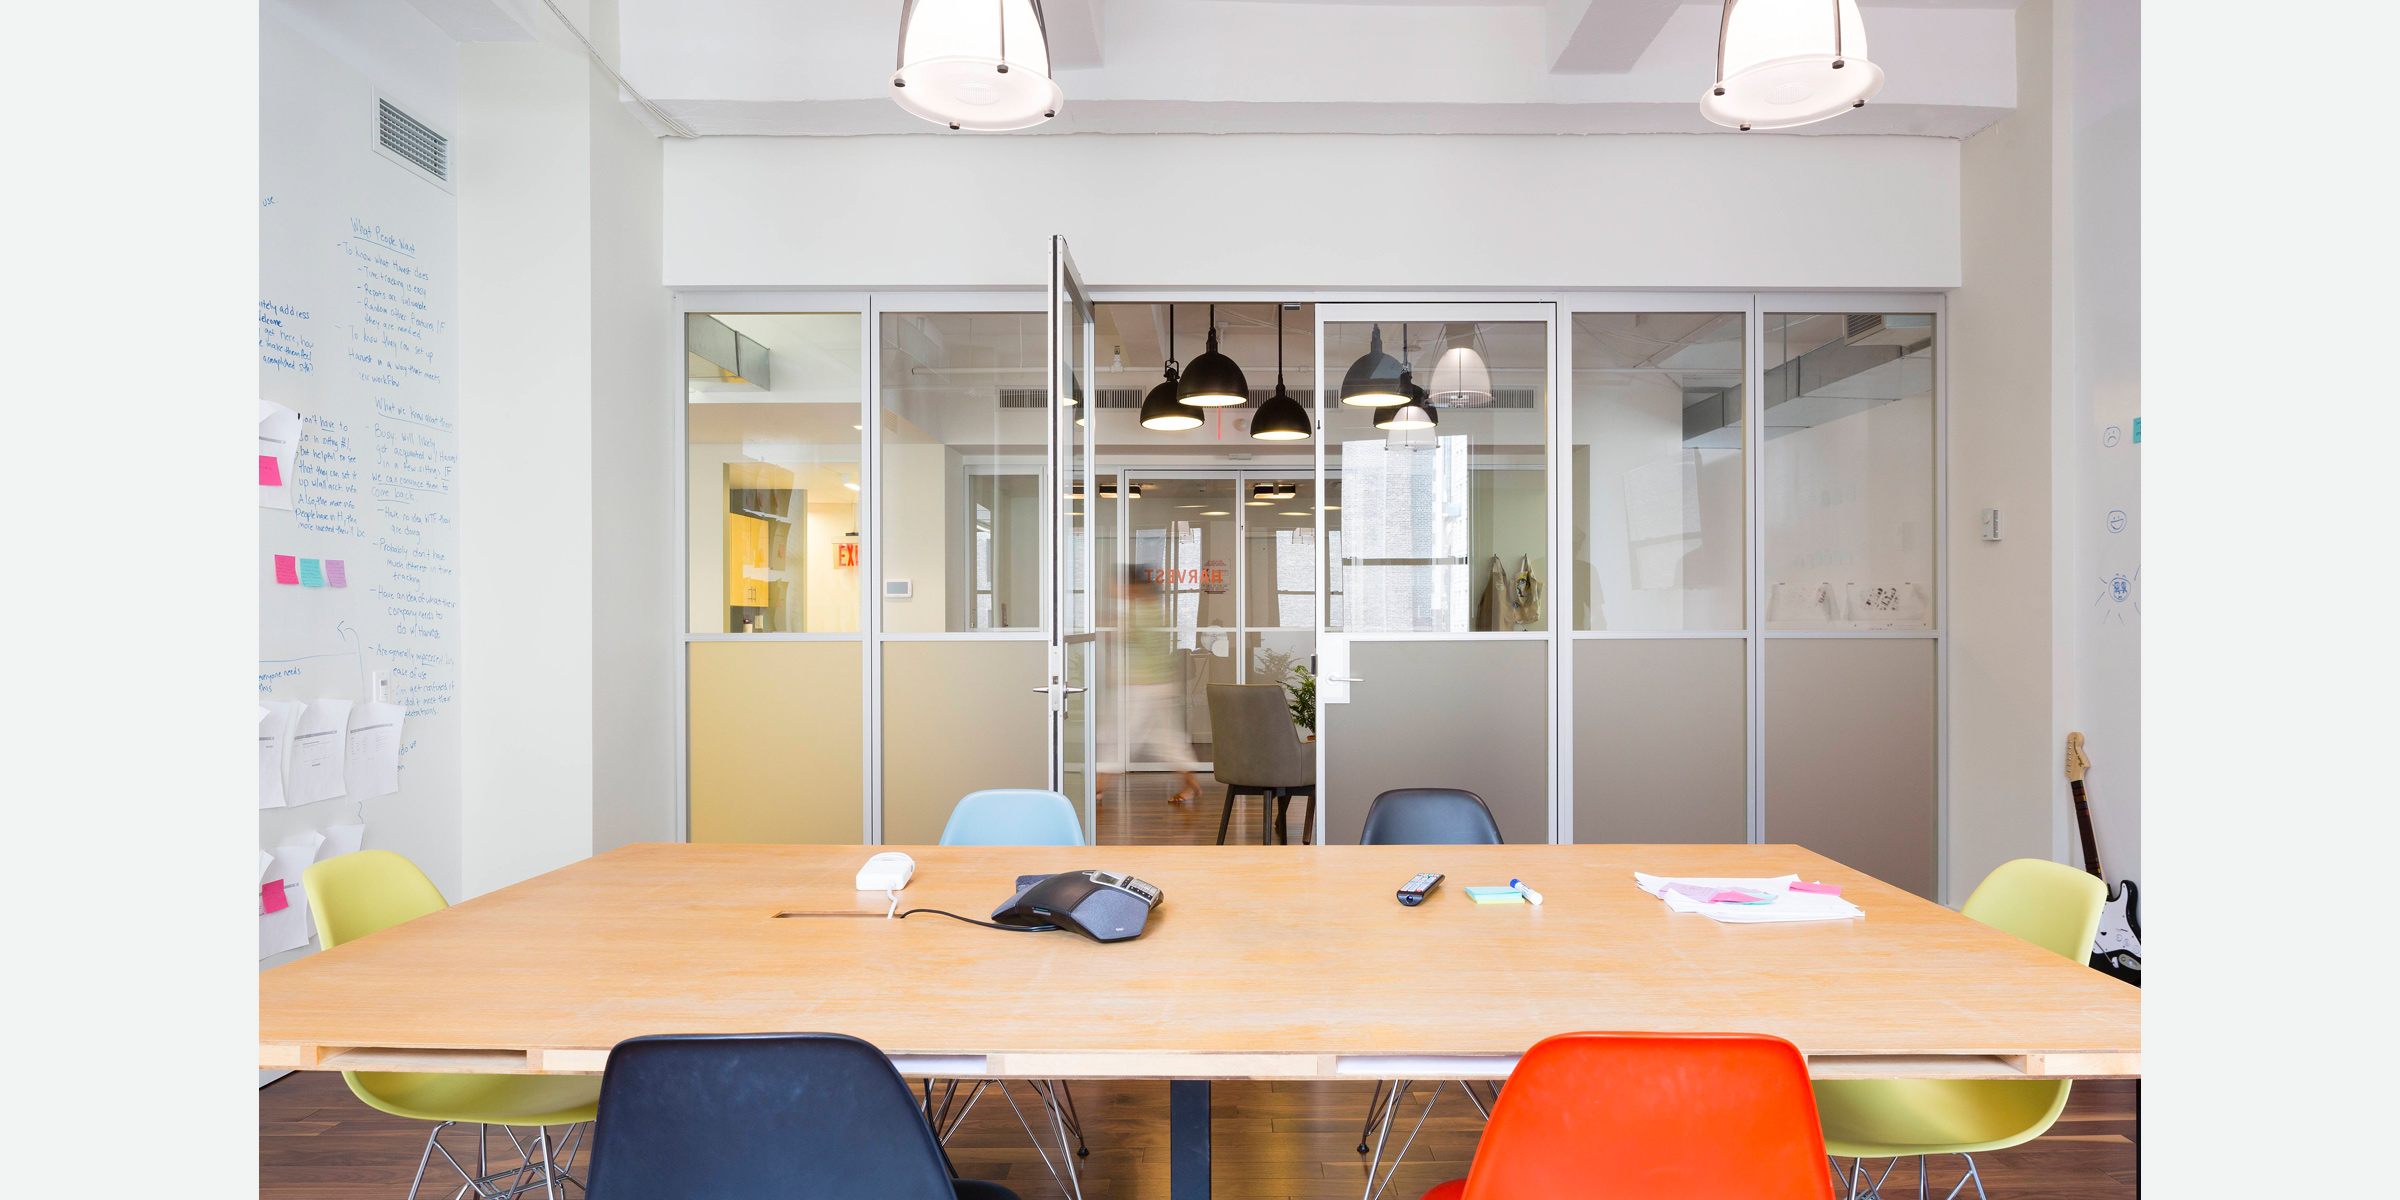 Harvest office: Swing doors and fixed panels helped designers with flexible space configurations while also maximizing light and transparency.